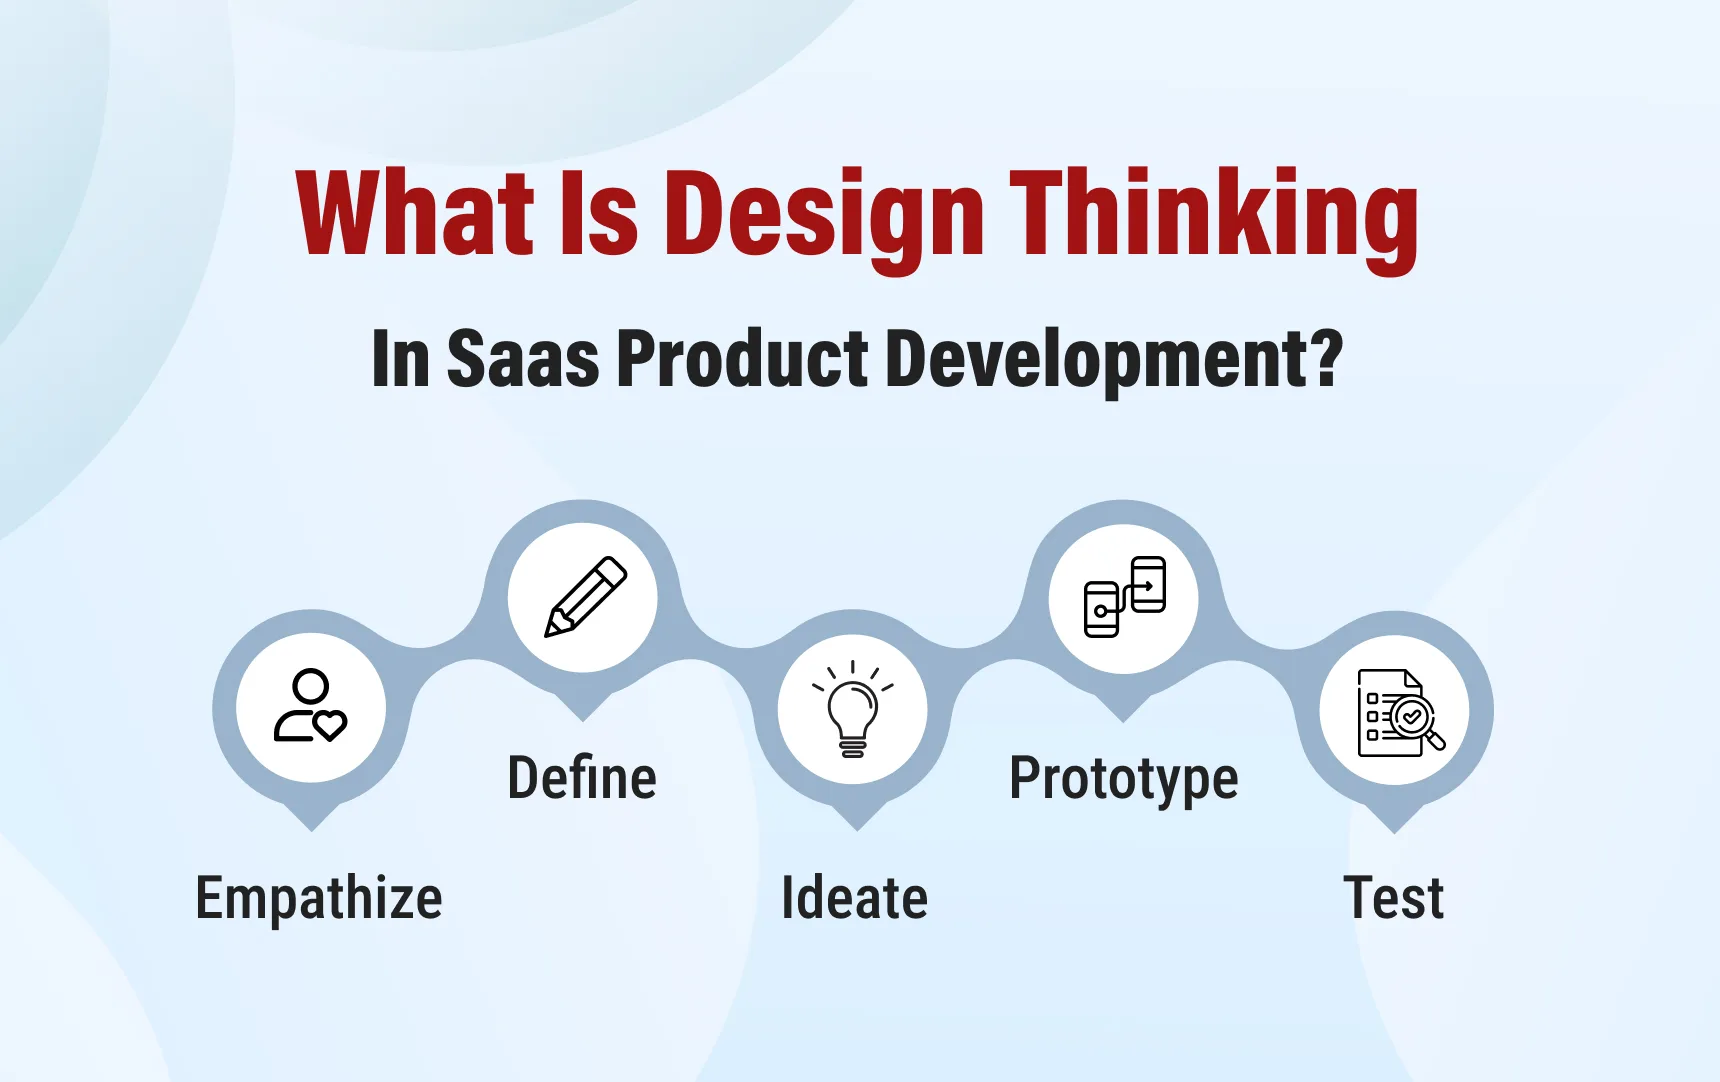 Design Thinking in Saas Product Development